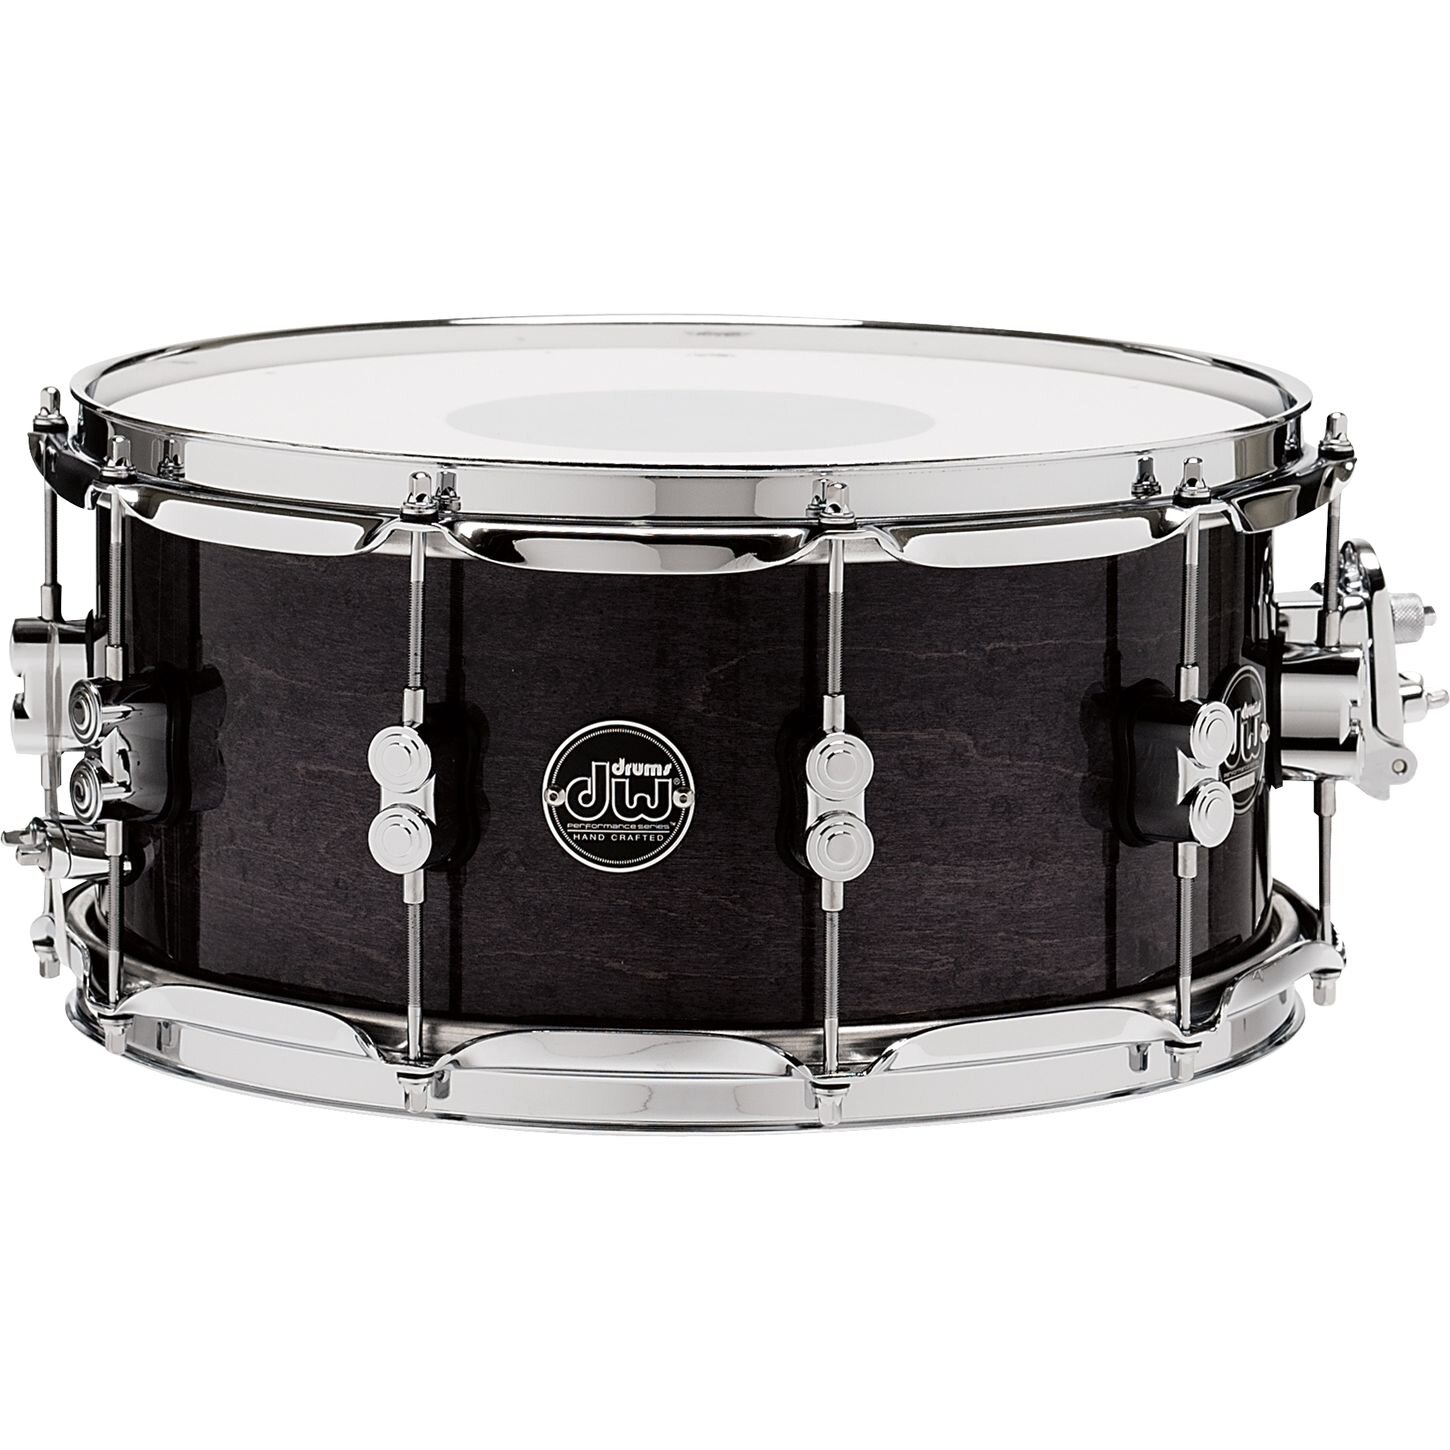 DW 800622 Snaredrum Performance Lacquer 14